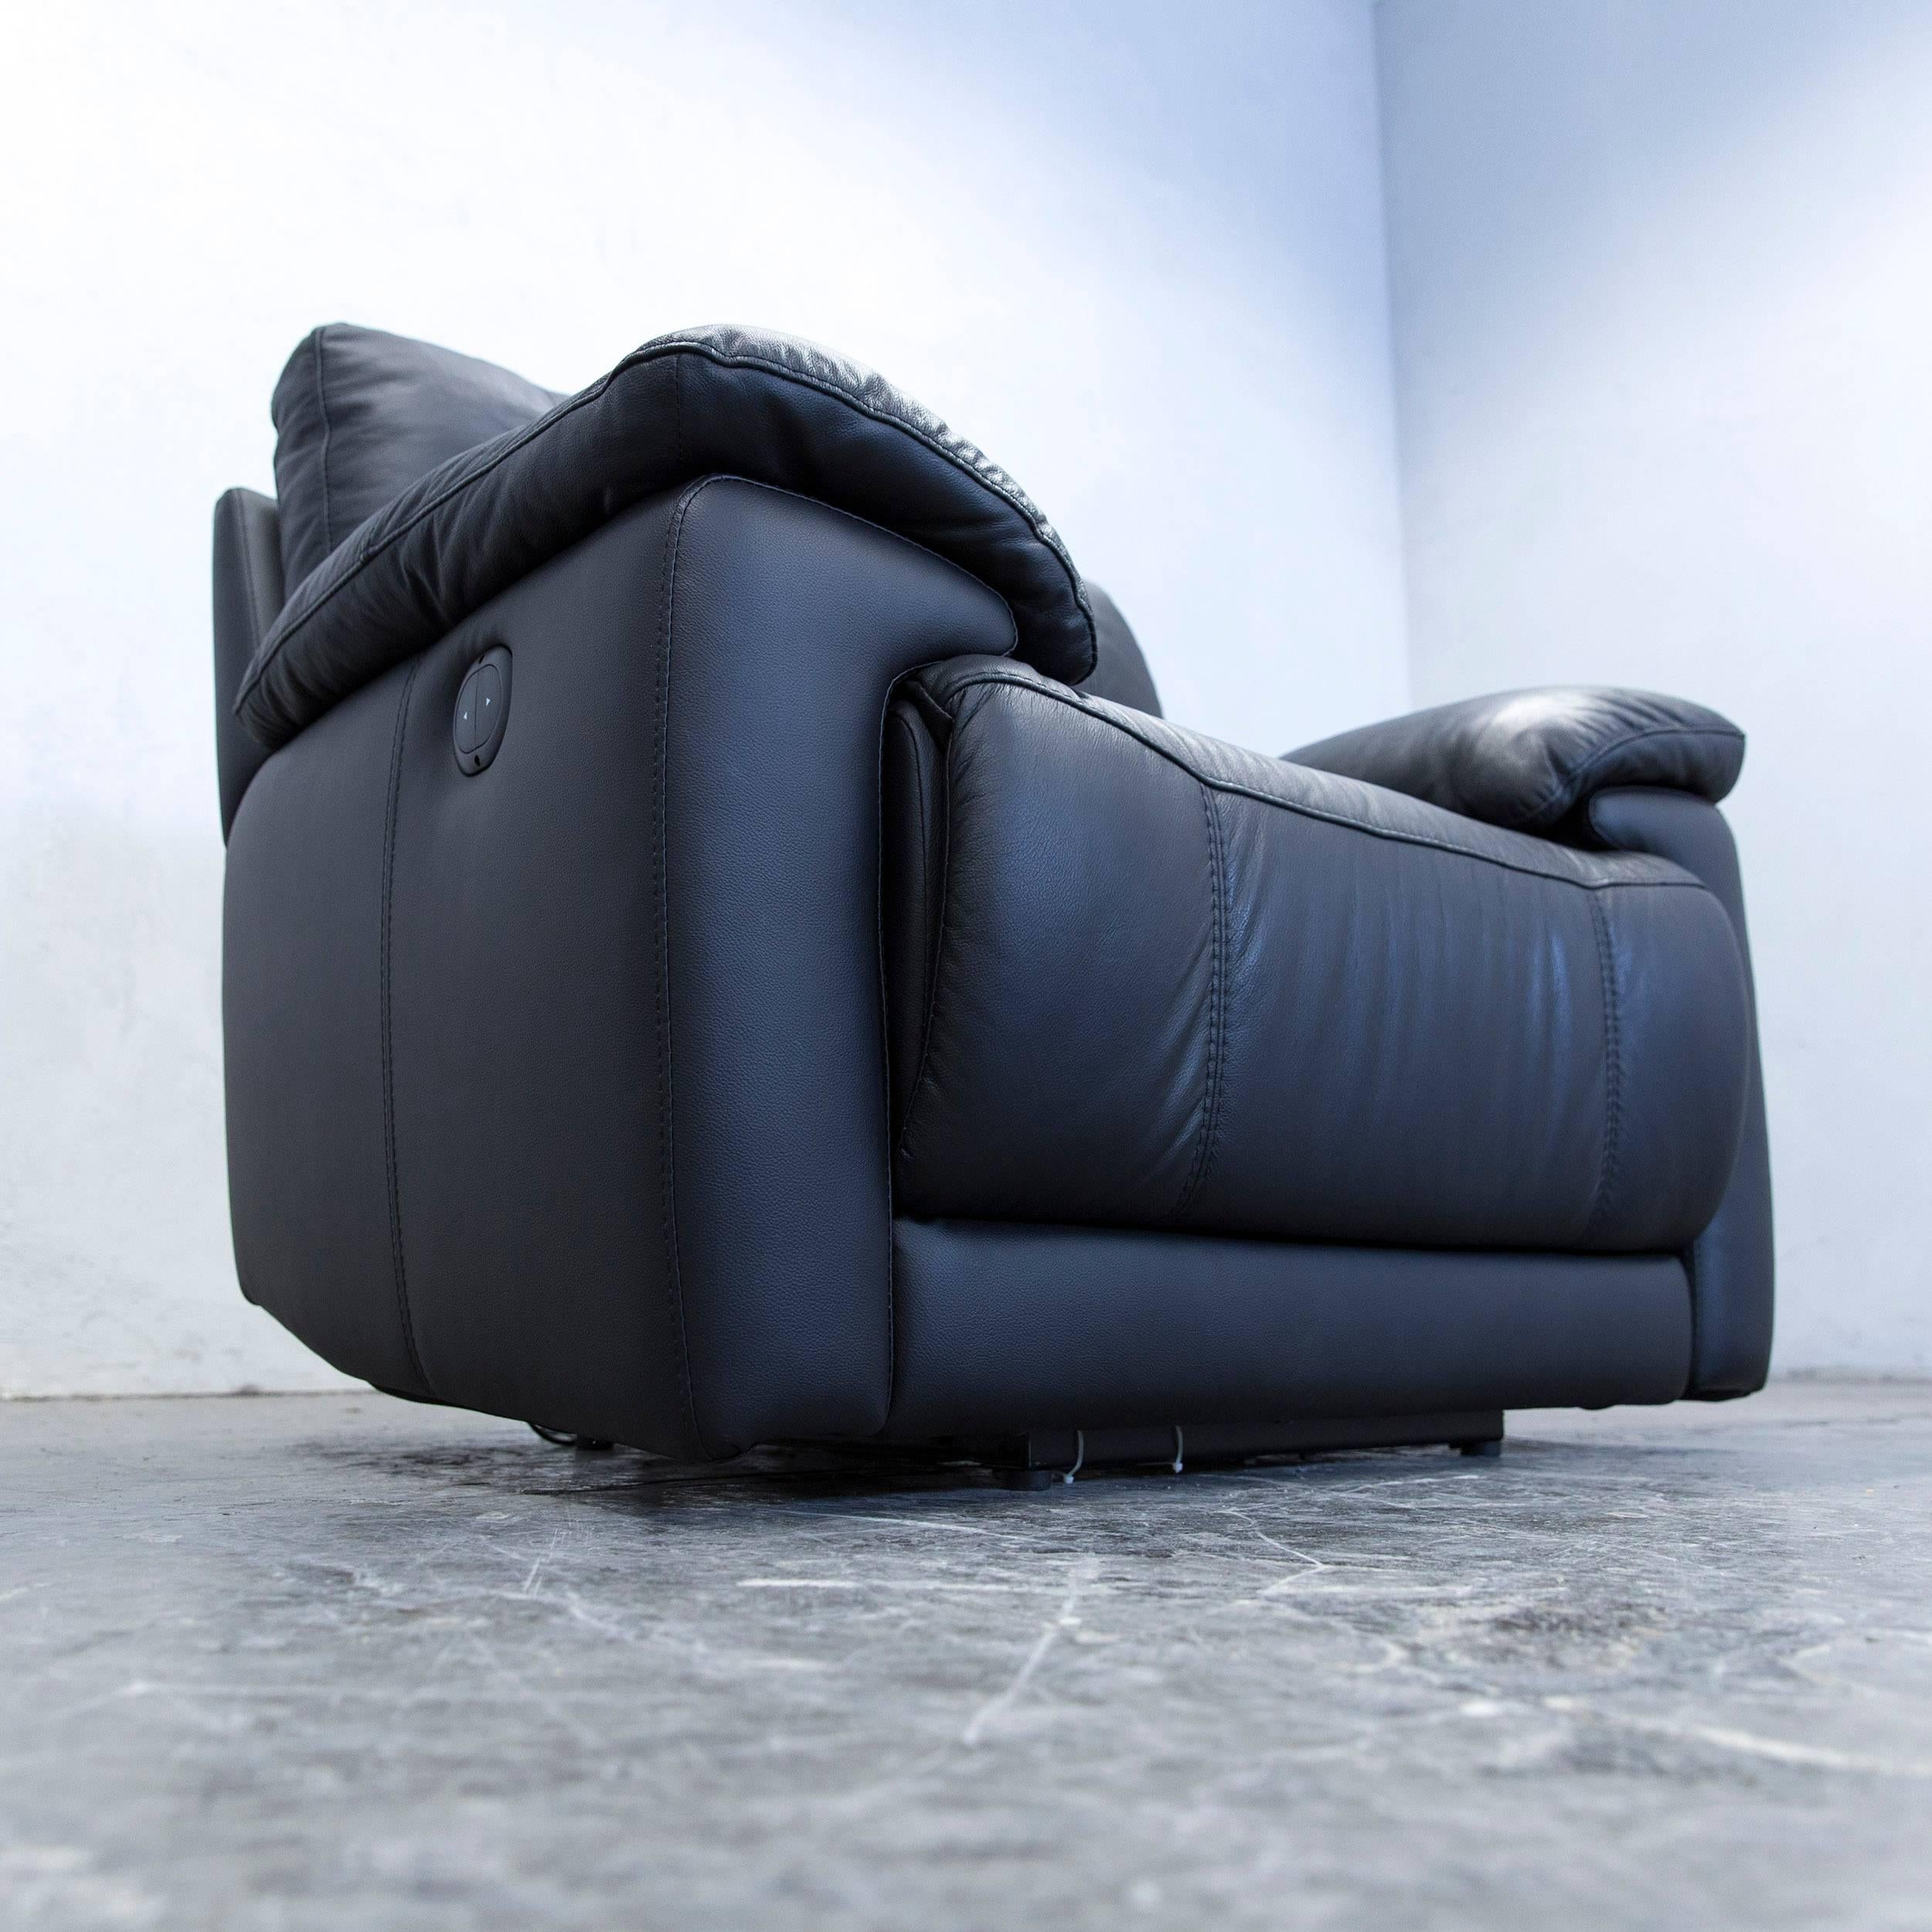 Designer Armchair Leather Black One-Seat Couch Electrical Function Modern Relax In Good Condition For Sale In Cologne, DE